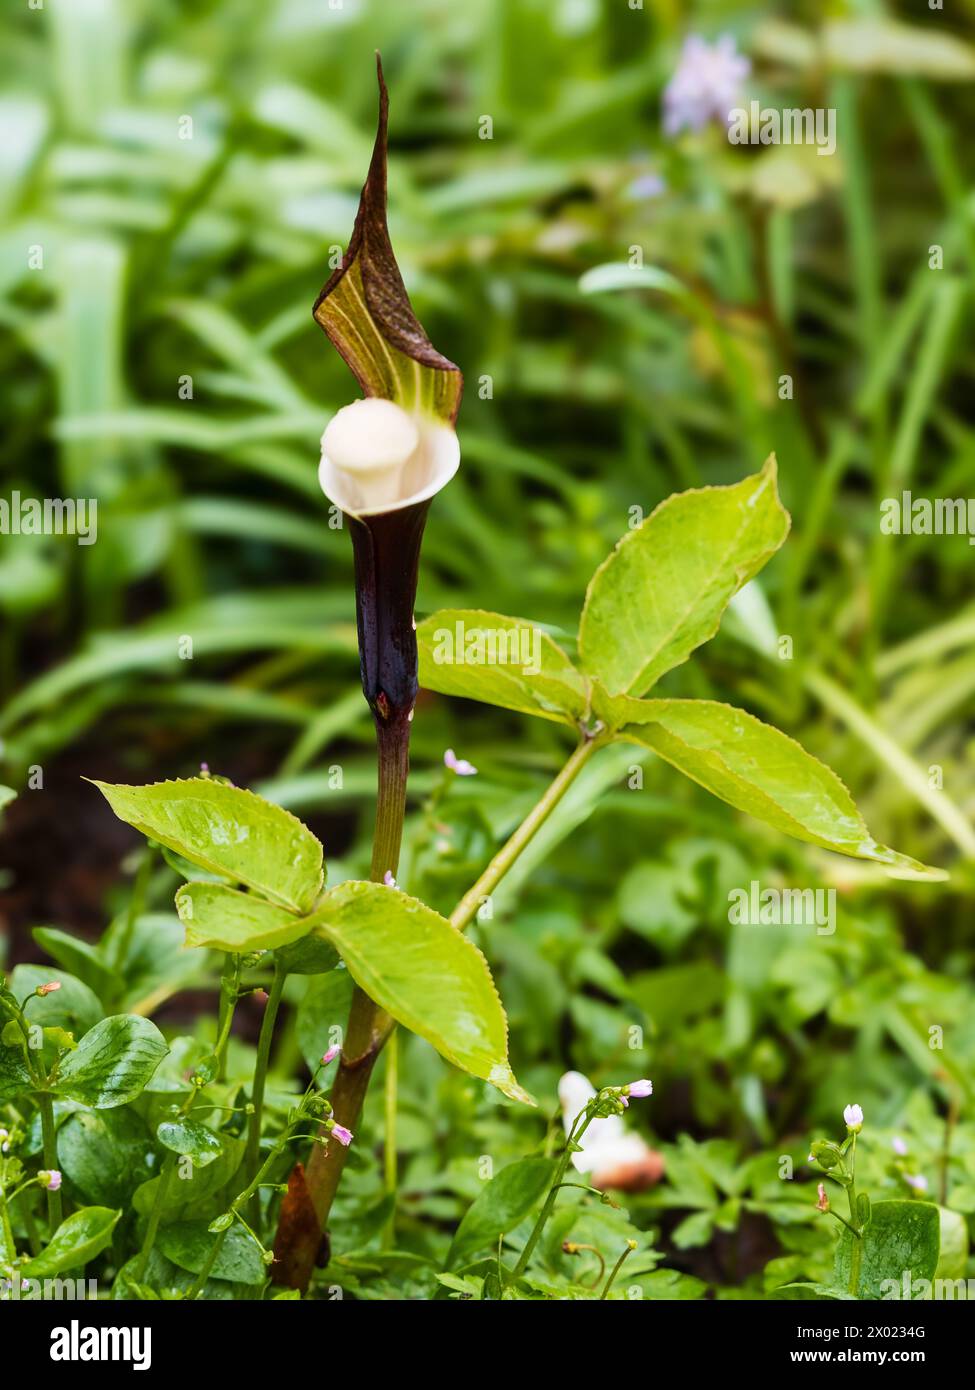 Exotic brown, hooded spathe and white interior and spadix of the hardy, spring flowering, woodland Japanese cobra lily, Arisaema sikokianum Stock Photo